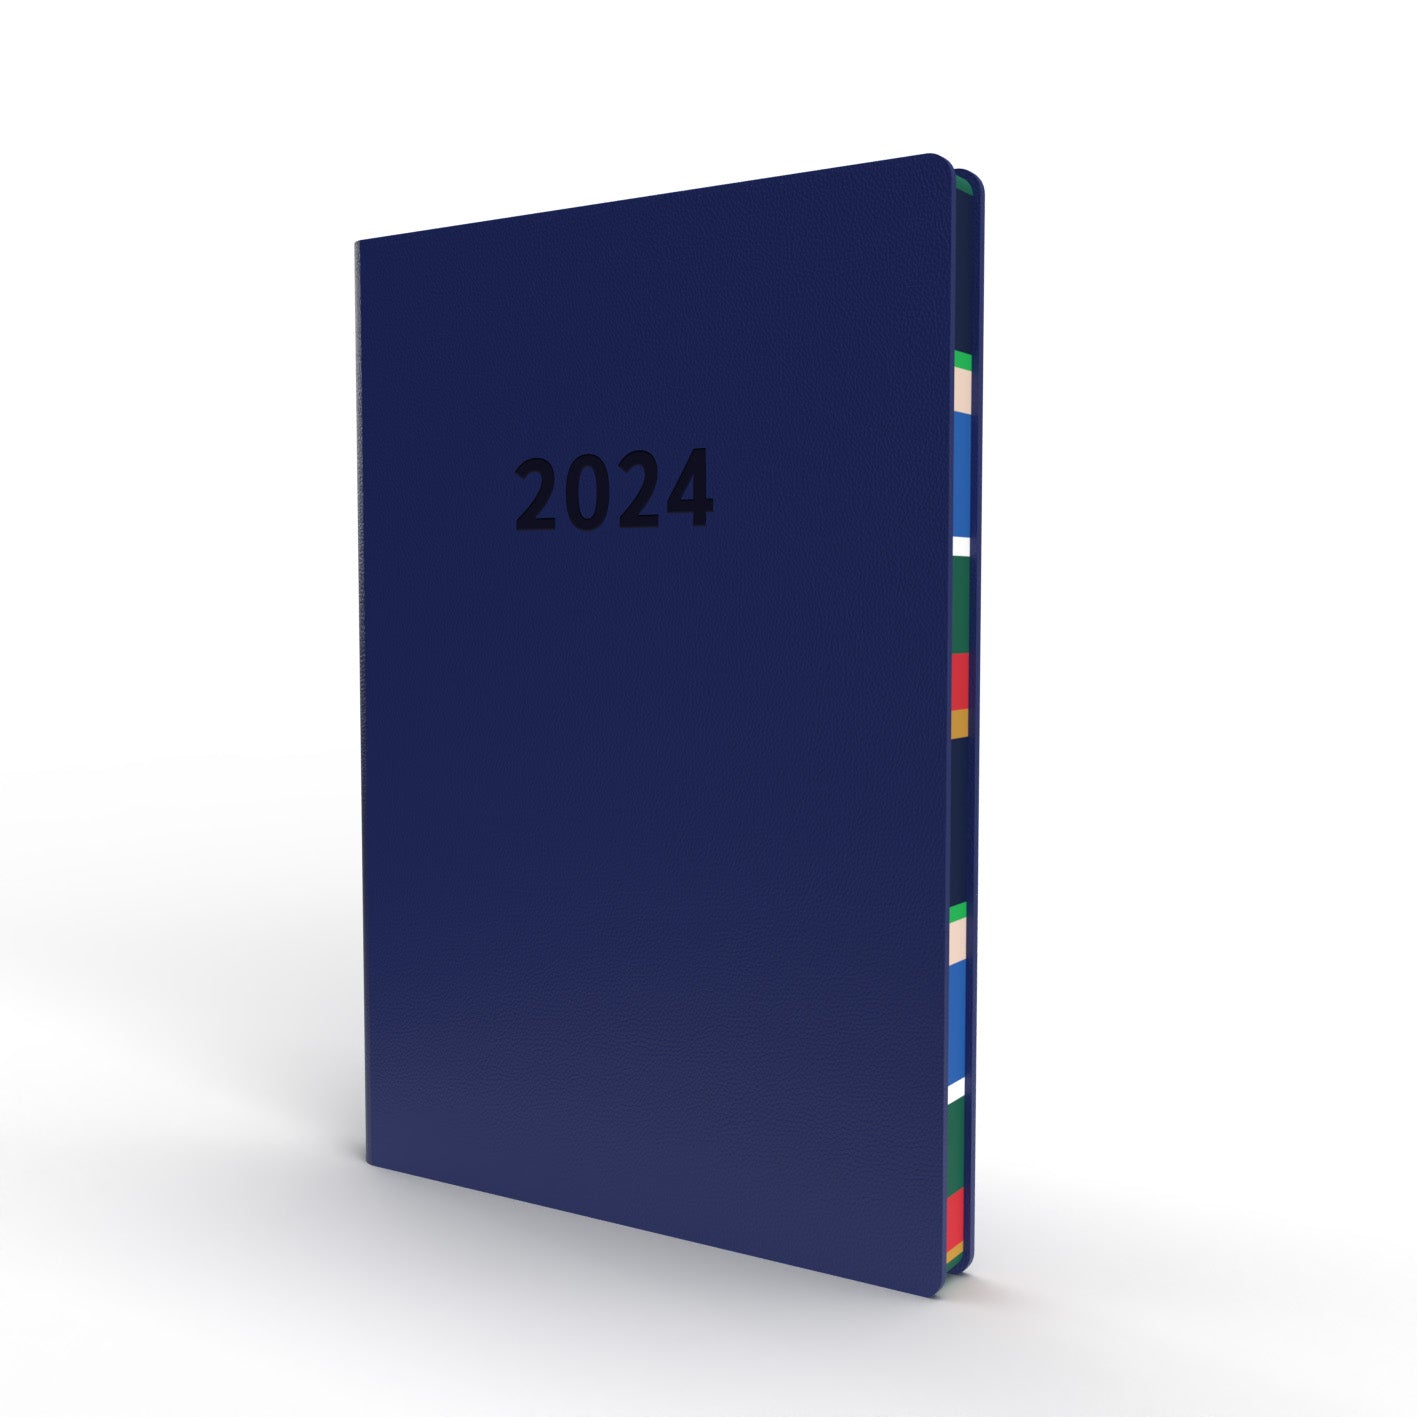 Collins Edge Mira - 2024 Weekly Lifestyle Planner - A5 Week-to-View Diary (EDMR153-24)